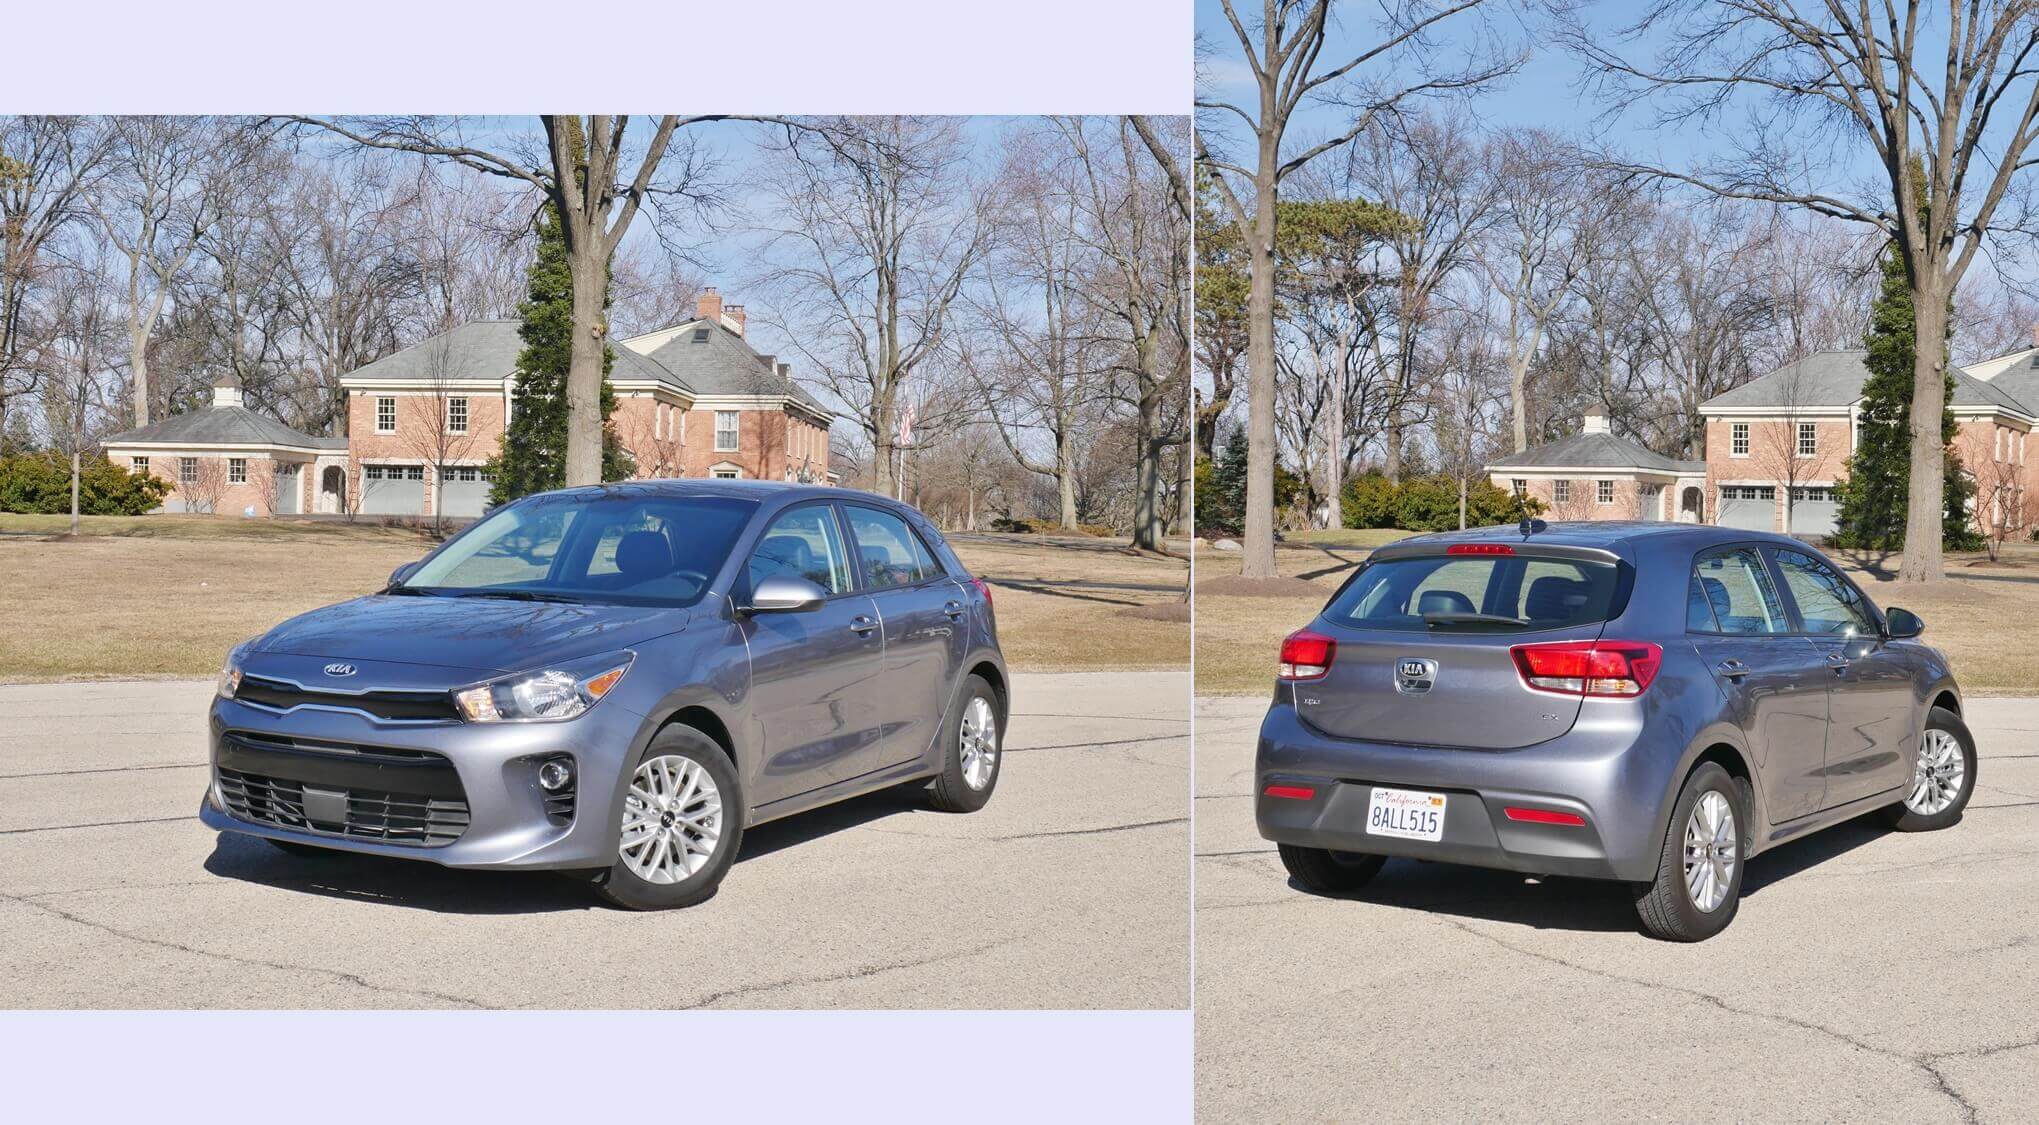 2018 Kia Rio 5 door EX: Comes of age with decisively more mature profile, practicality and driving characteristics